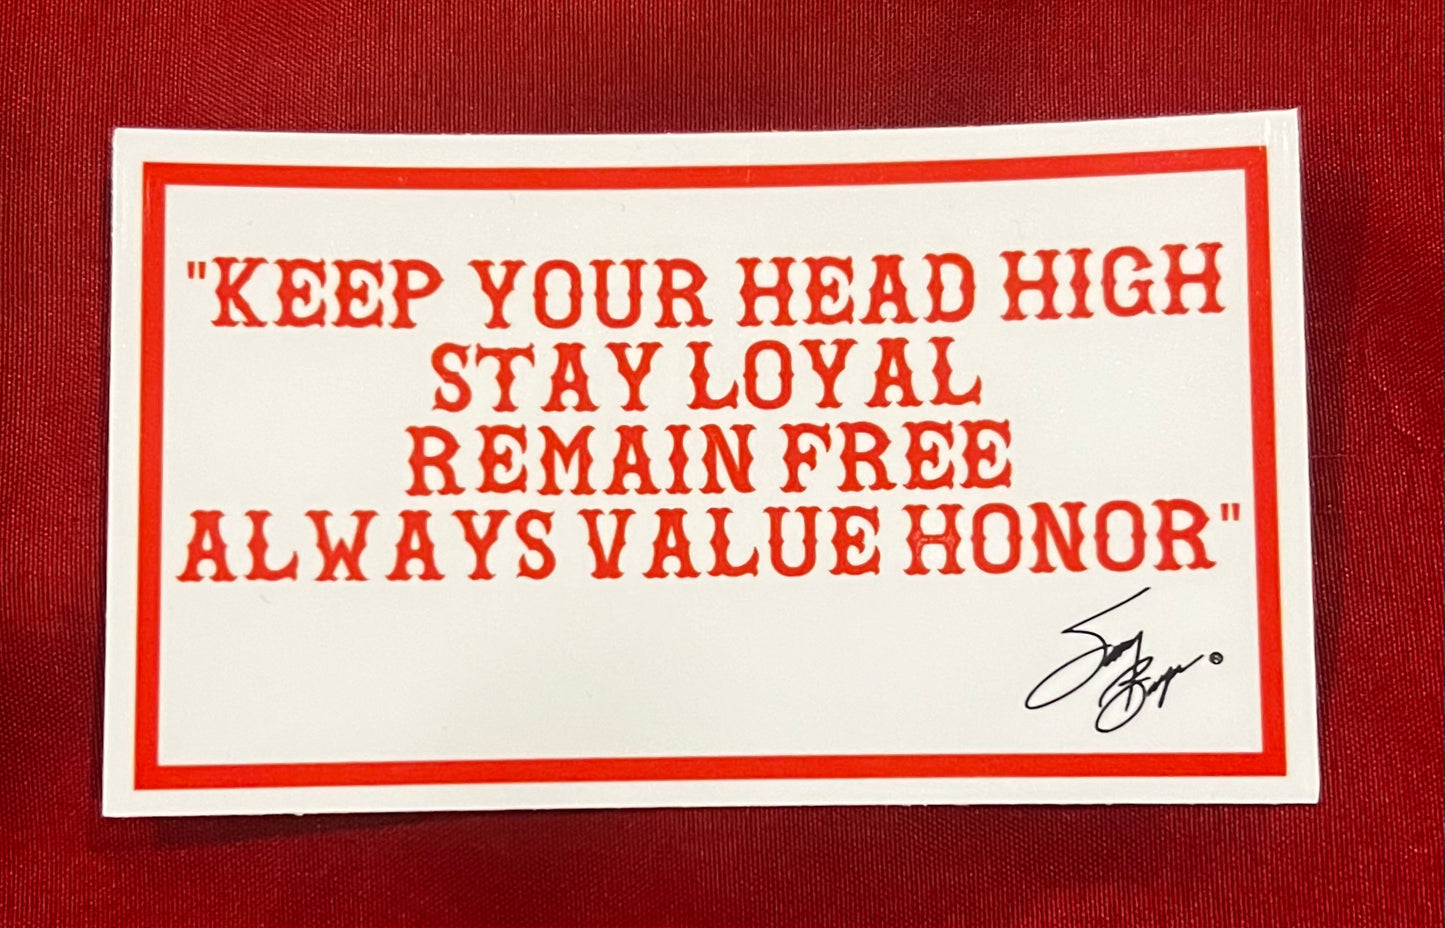 Sonny’s words, “Keep your head High, Stay Loyal, Remain Free, Always Value Honor” sticker